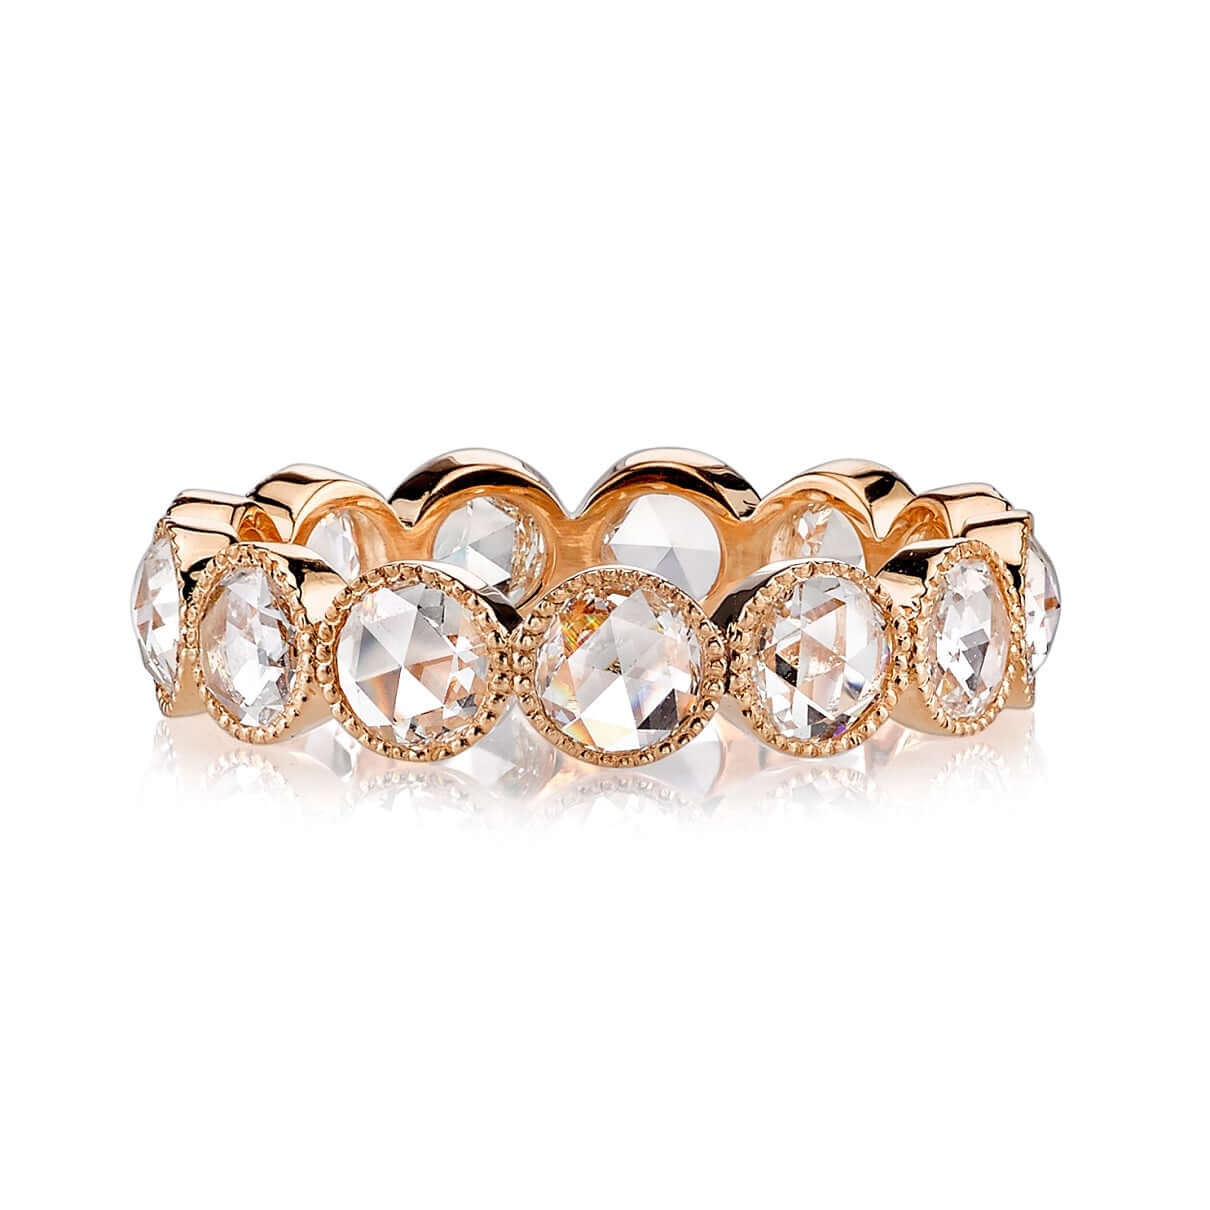 SINGLE STONE LARGE ROSE CUT GABBY BAND | ﻿Approximately 2.00ctw G-H/VS-SI Rose cut diamonds bezel set in a handcrafted eternity band. Approximate band width 4.8mm. Please inquire for additional customization.